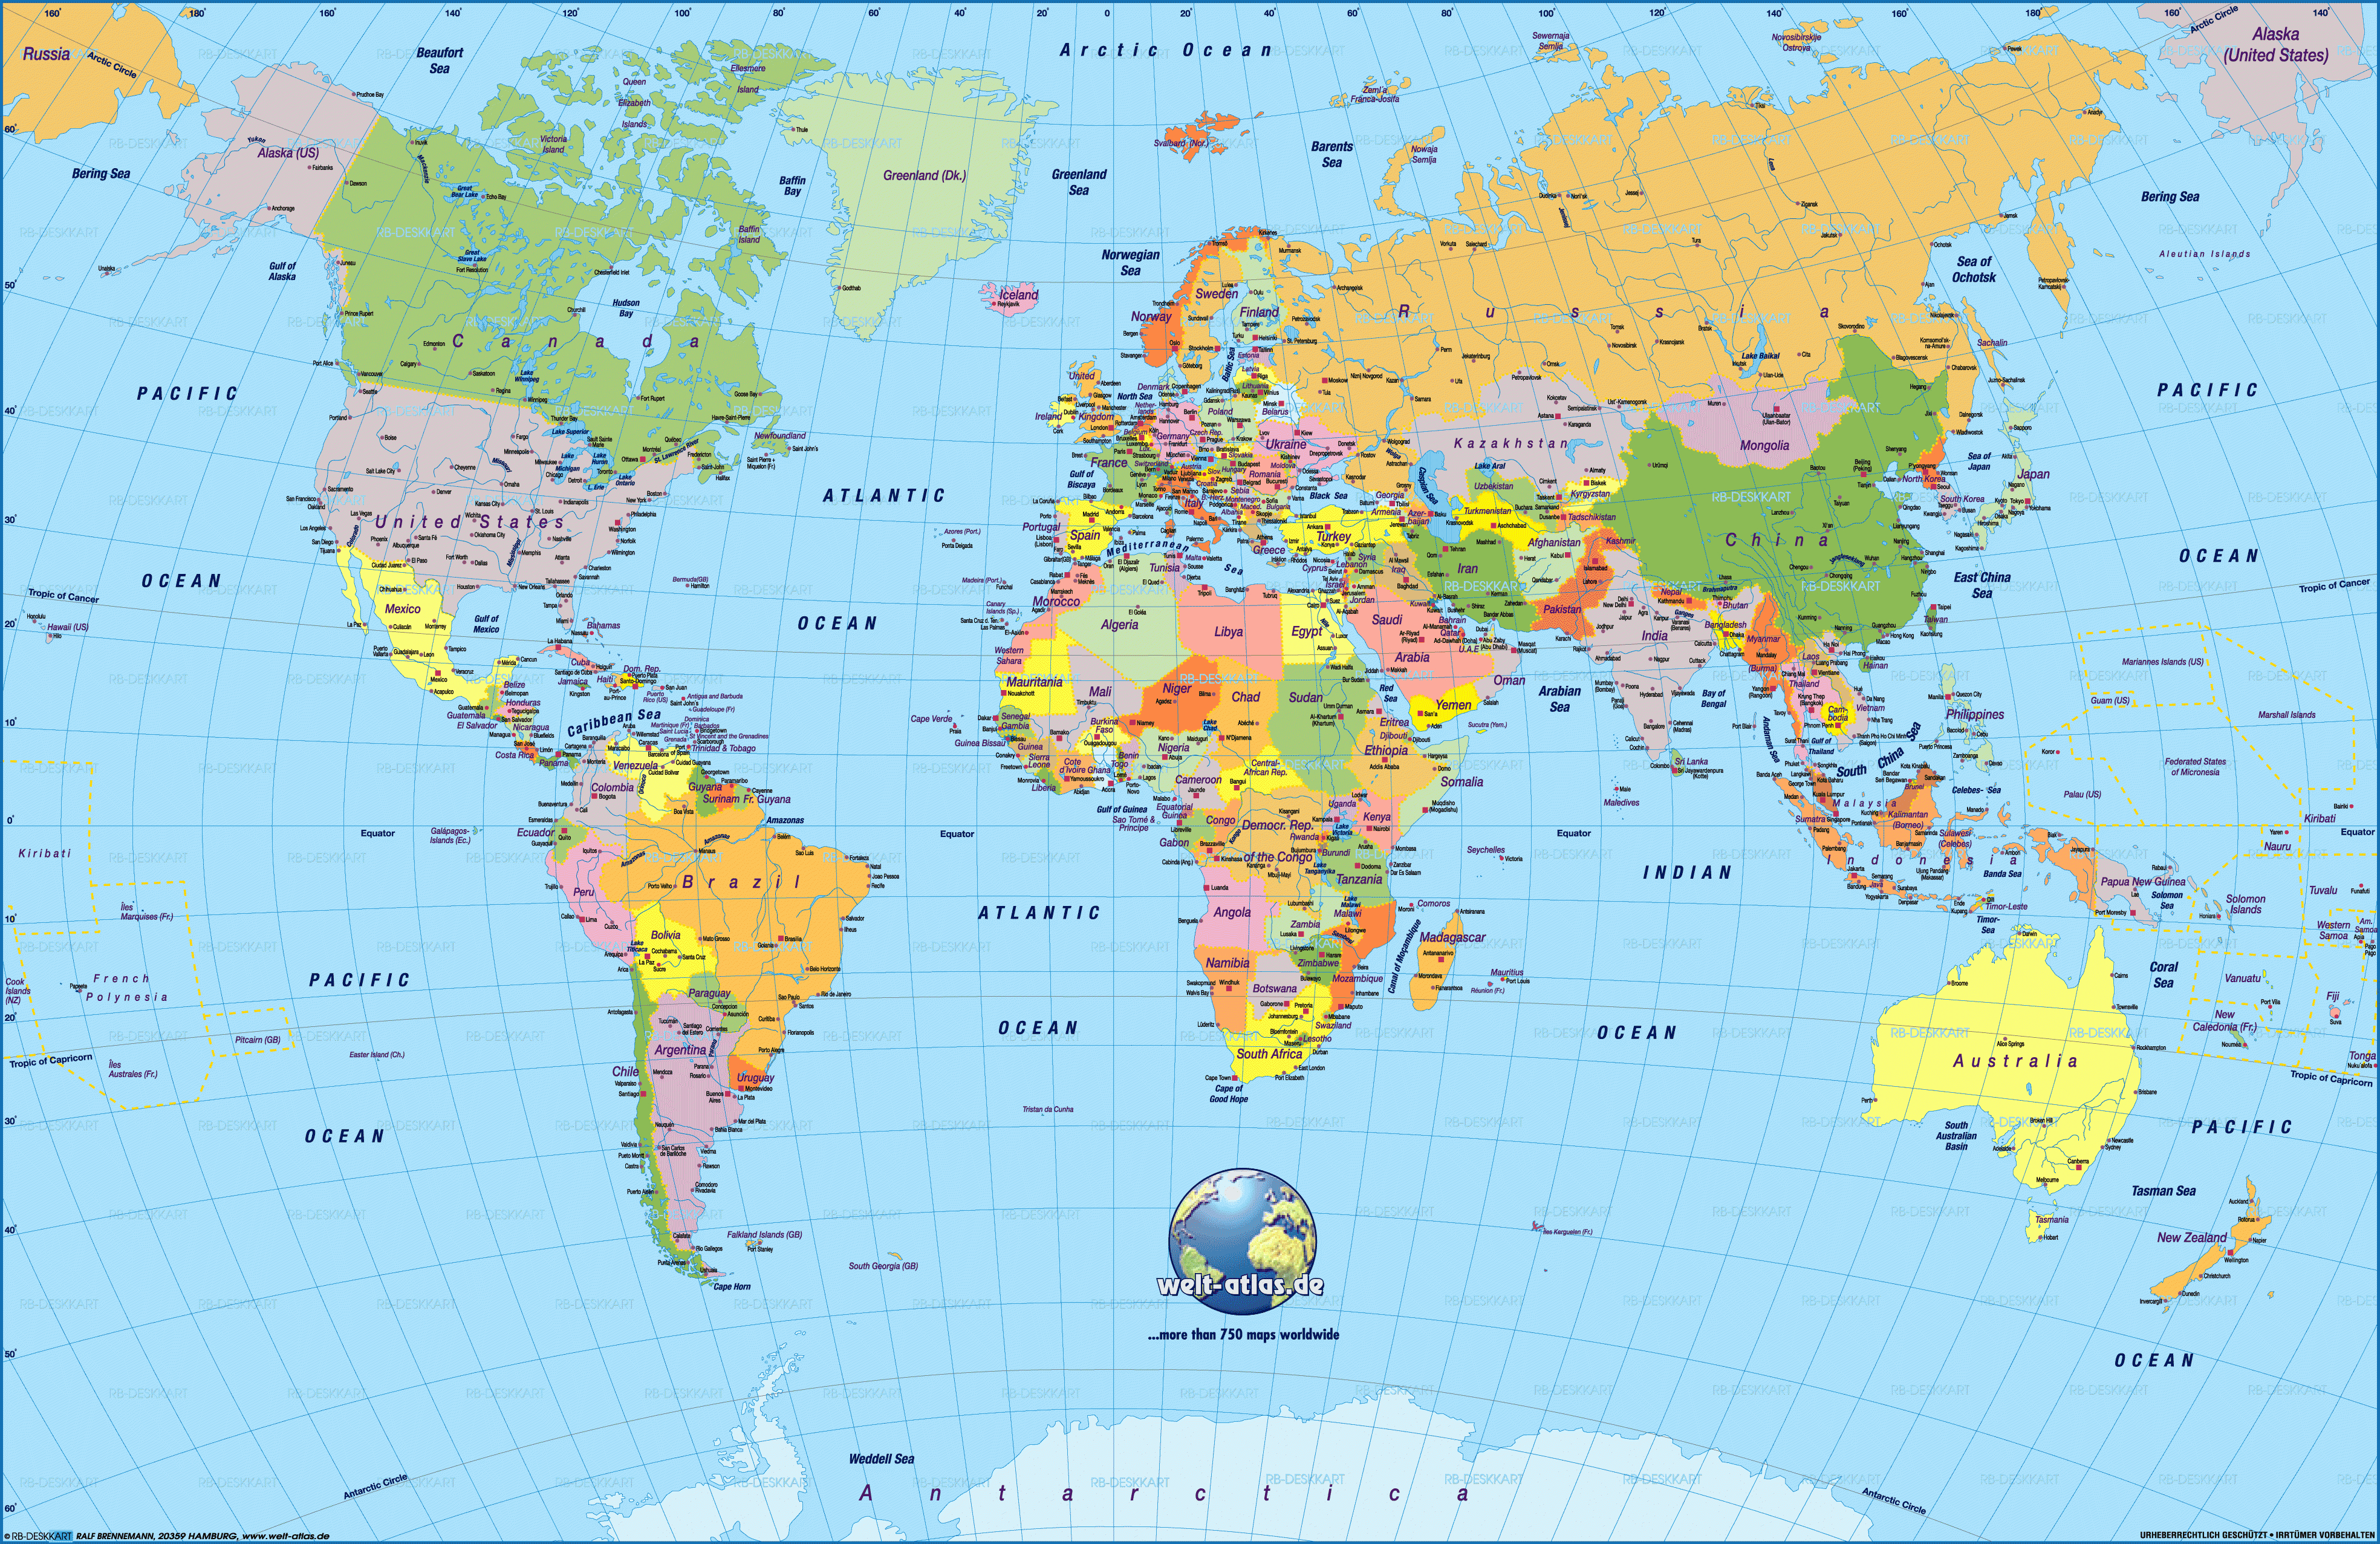 Printable World Map Labeled | World Map See Map Details From Ruvur - Free Printable World Maps Online